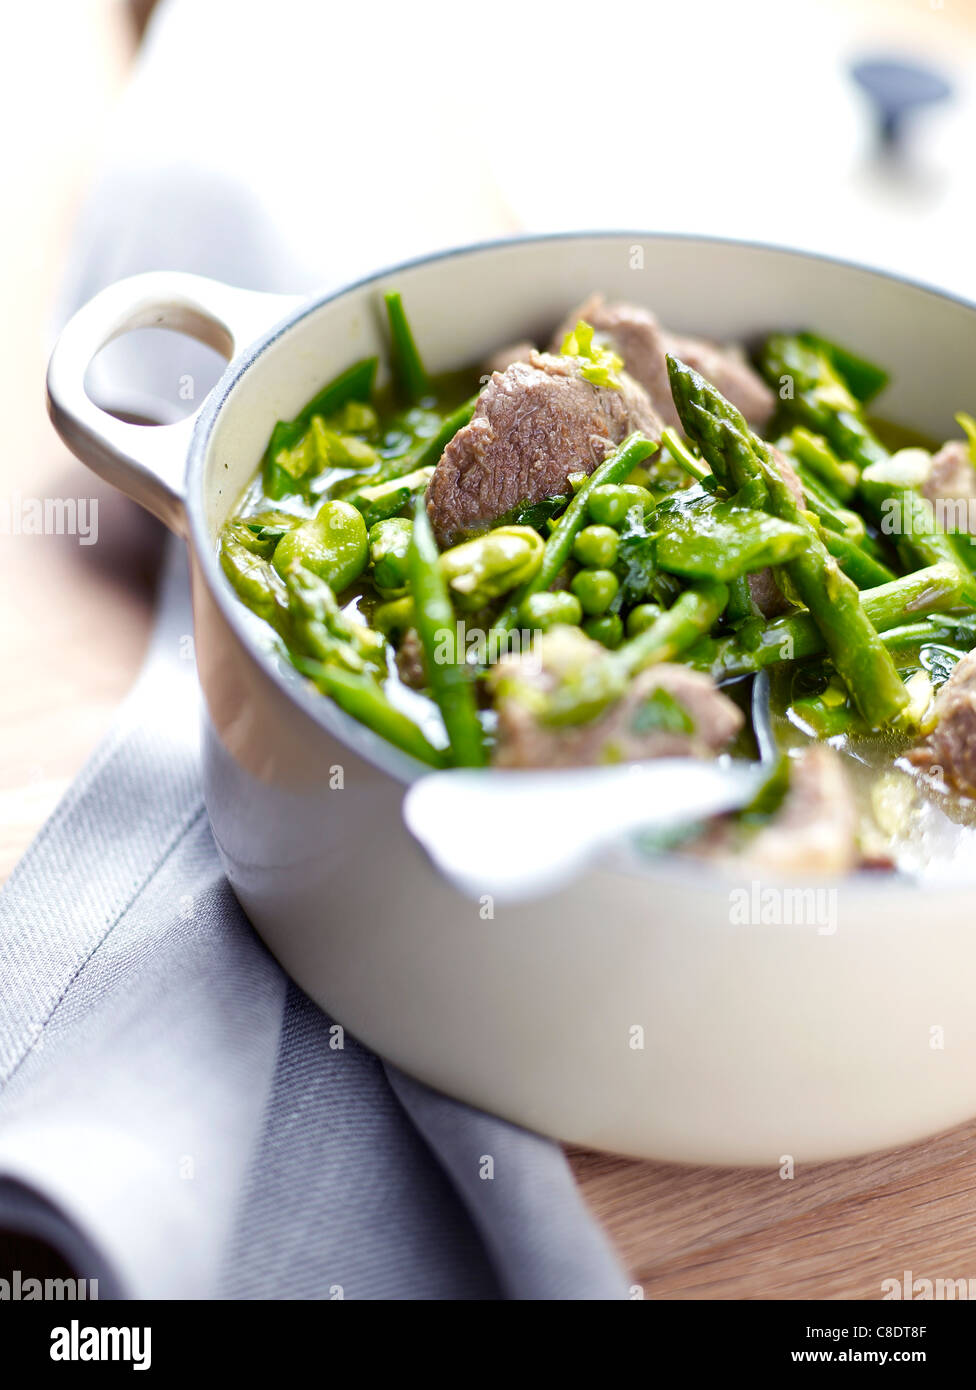 Casserole dish of lamb and green vegetables Stock Photo